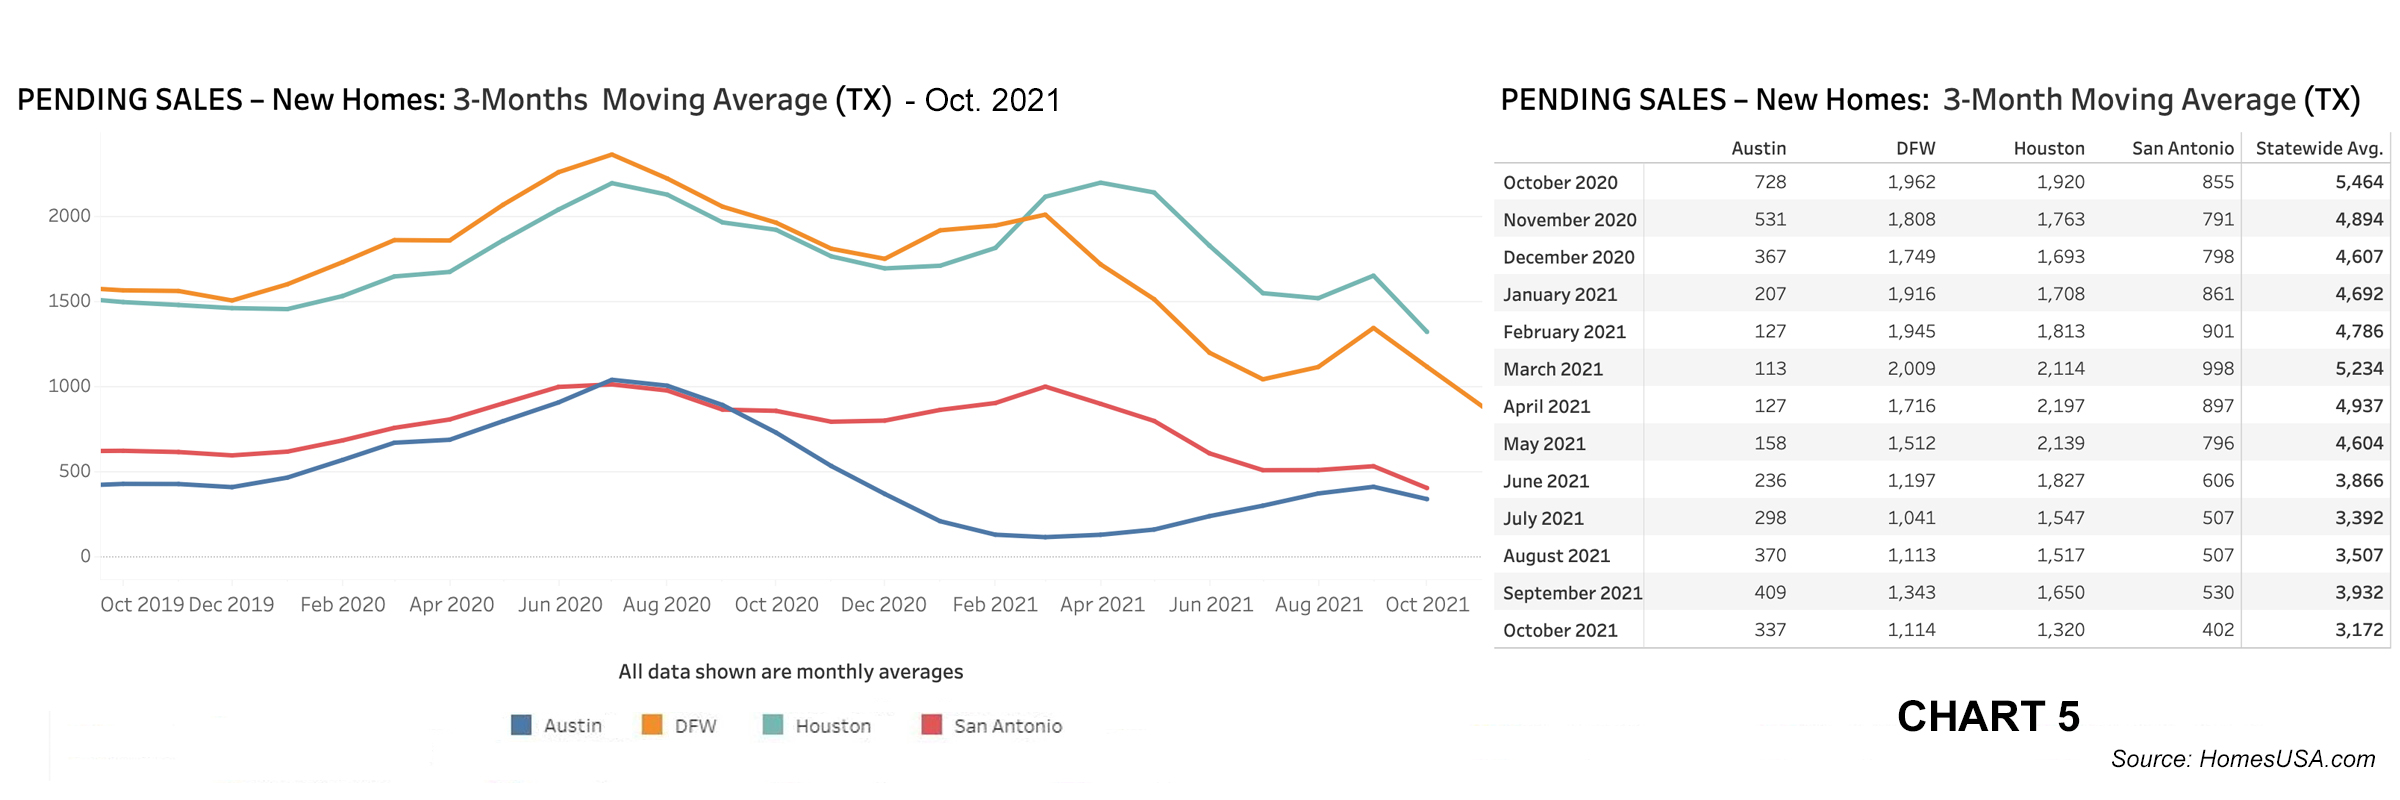 Chart 5: Texas Pending New Home Sales – Oct. 2021